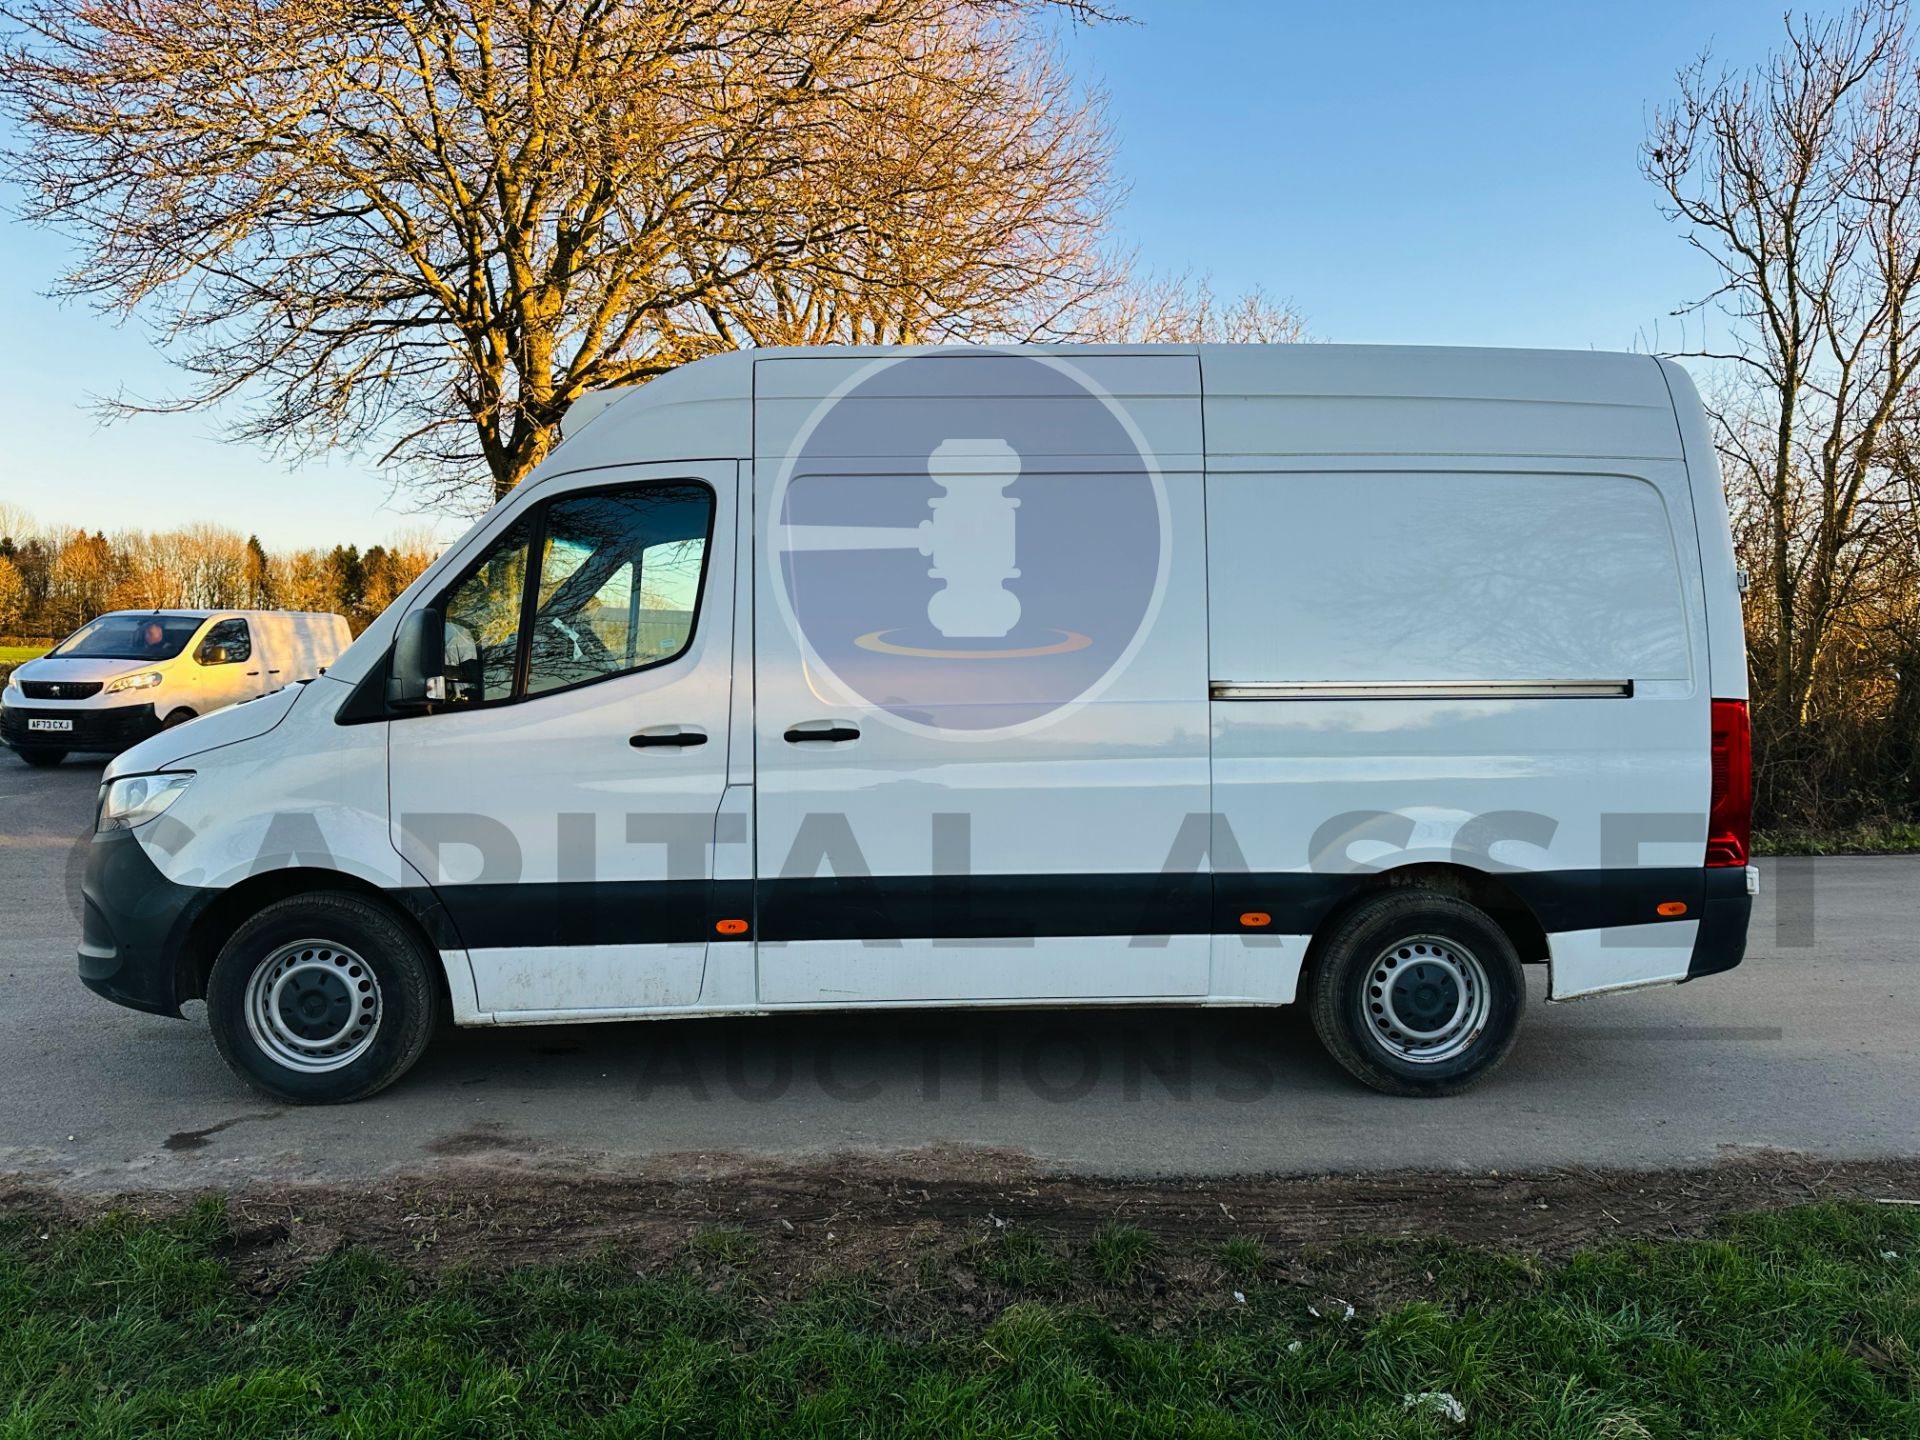 MERCEDES-BENZ SPRINTER 314 CDI *MWB - REFRIGERATED VAN* (2019 - FACELIFT MODEL) *OVERNIGHT STANDBY* - Image 6 of 33